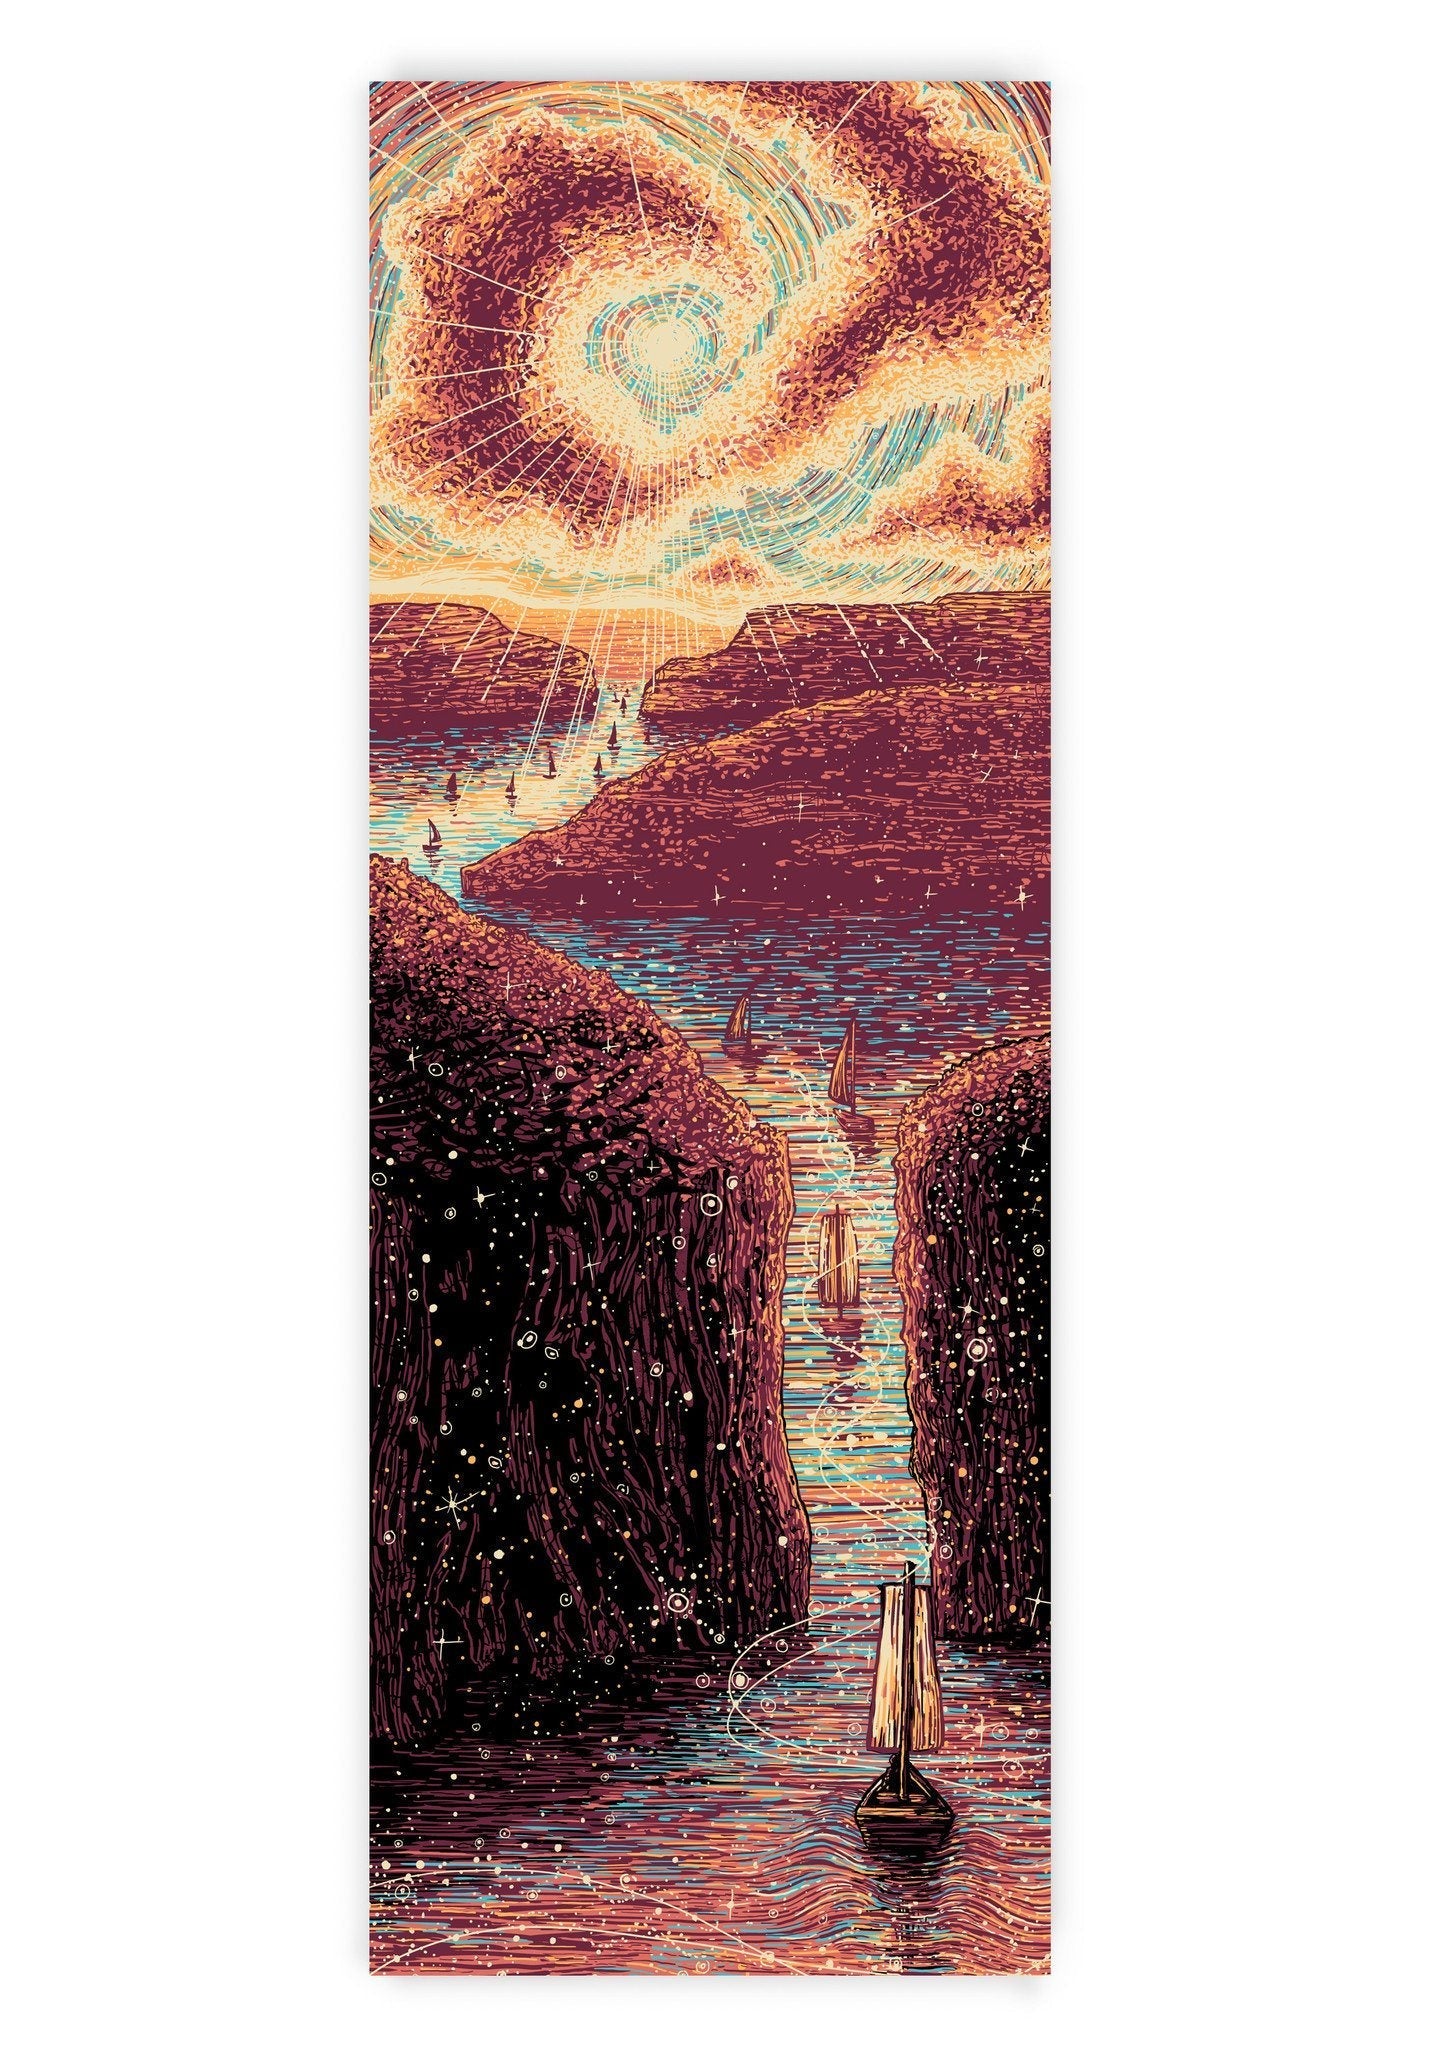 Where We're Going (Limited Edition of 35) James R. Eads